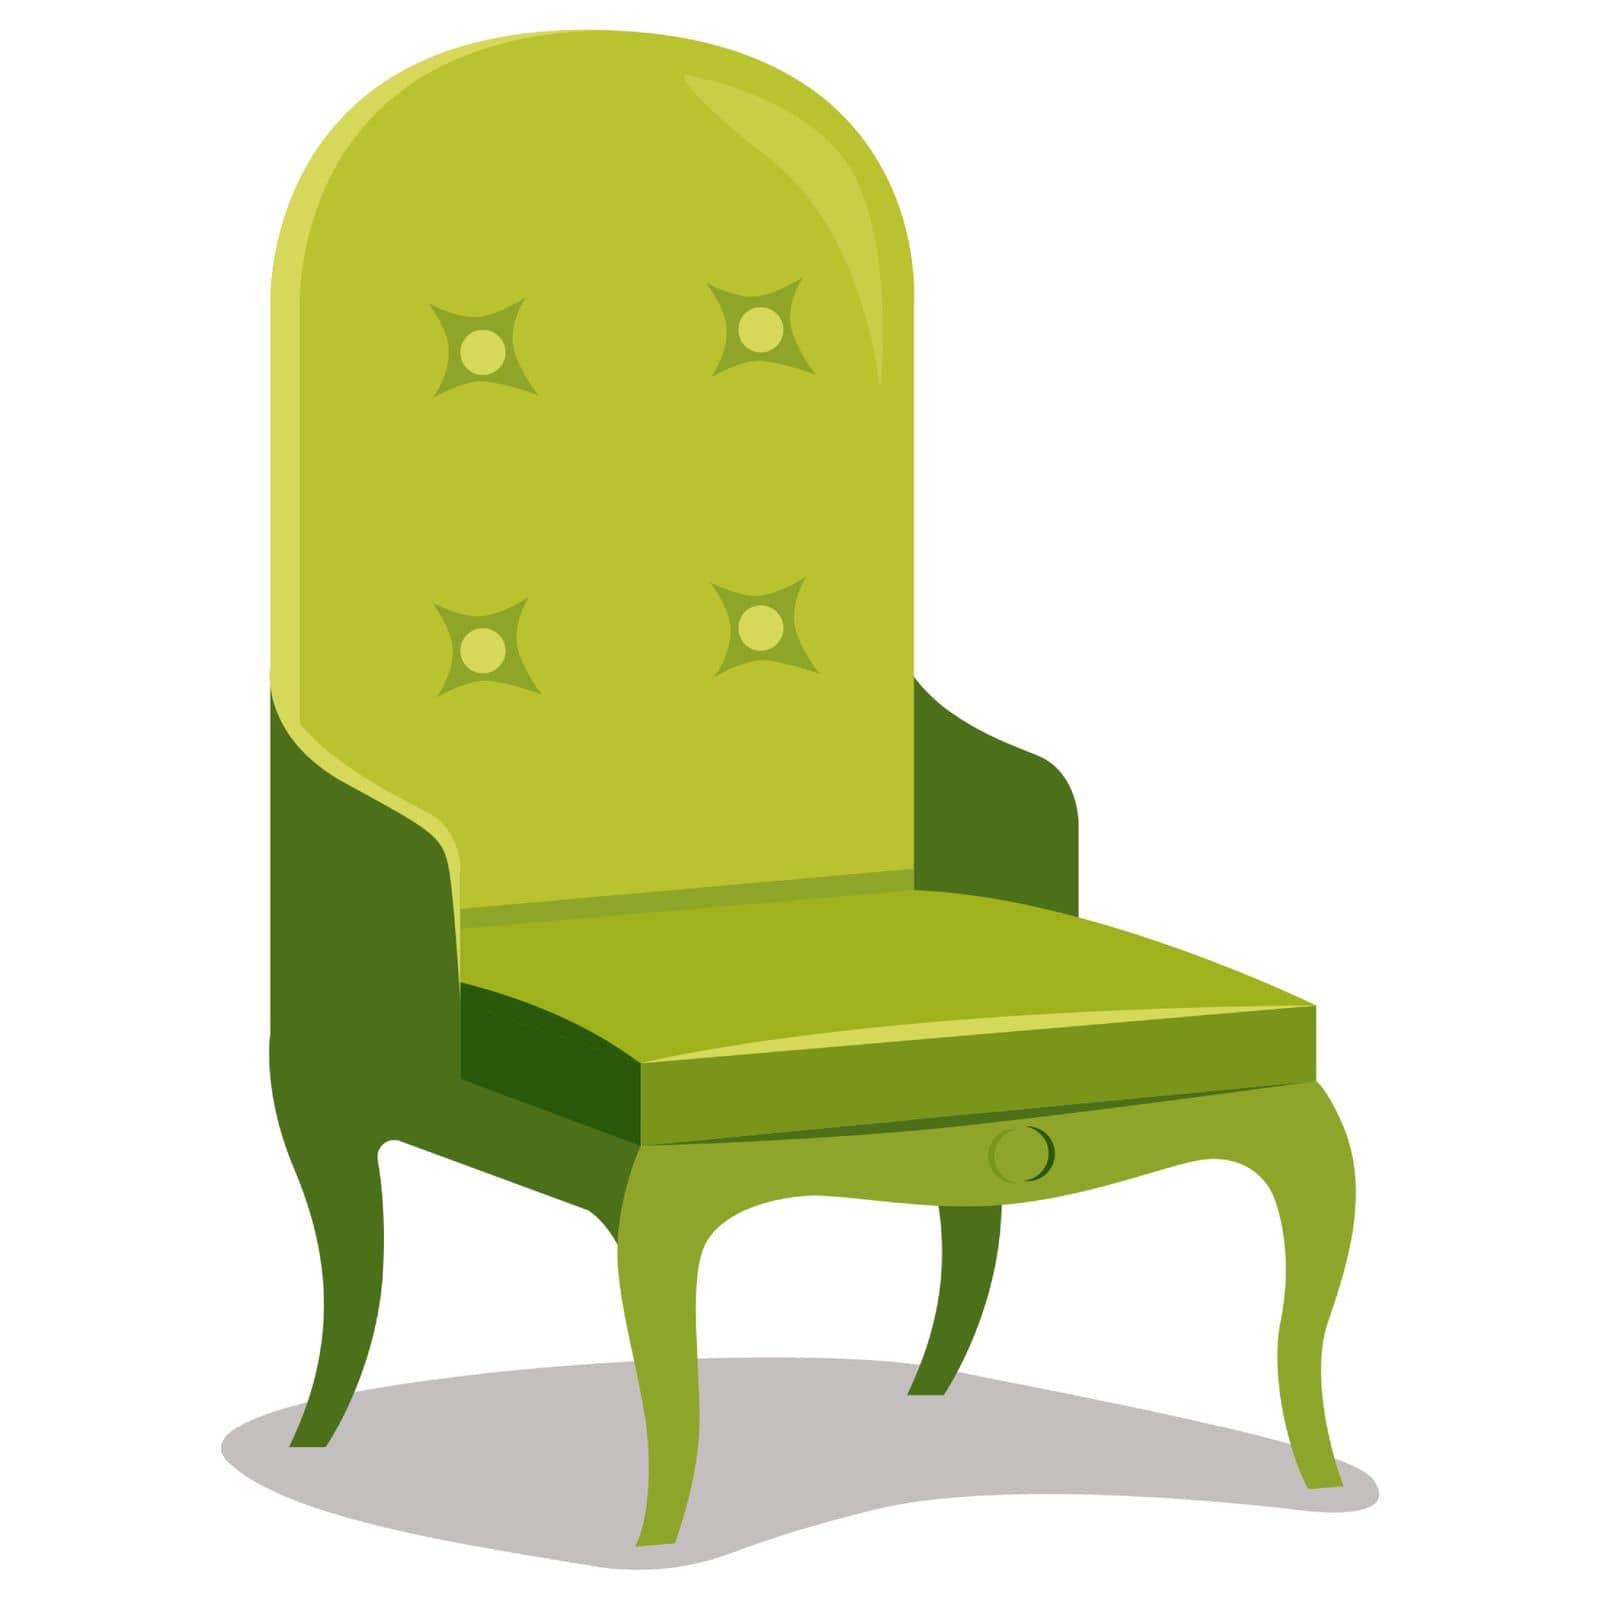 green upholstered armchair for the home. home interior furniture. flat vector illustration.